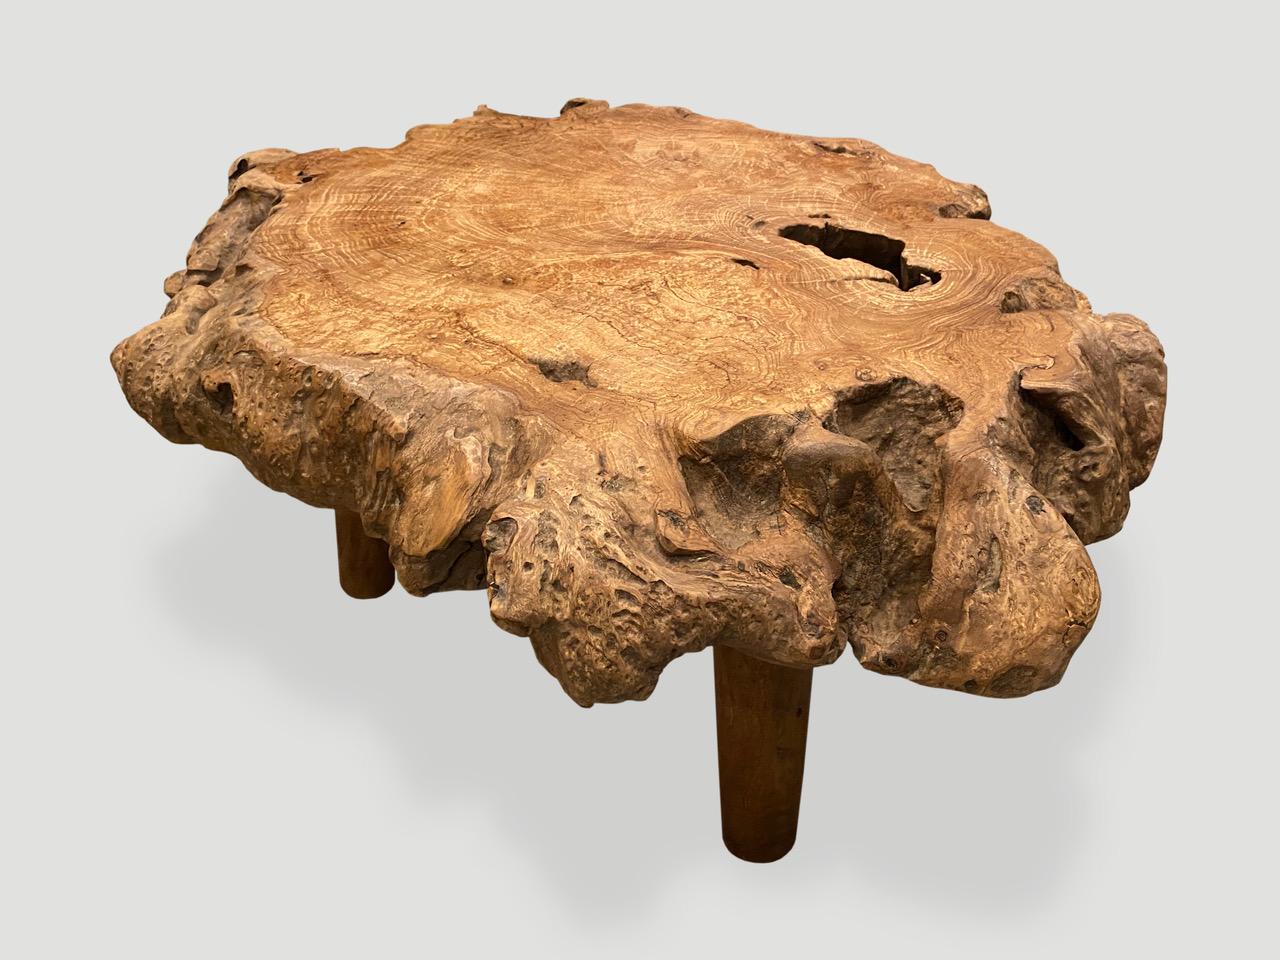 Impressive four inch top reclaimed teak root coffee table or side table. It’s fascinating how Mother Nature produces these logs with such beautiful patterns and markings throughout. A blend of organic and mid century. We polished the wood to enhance